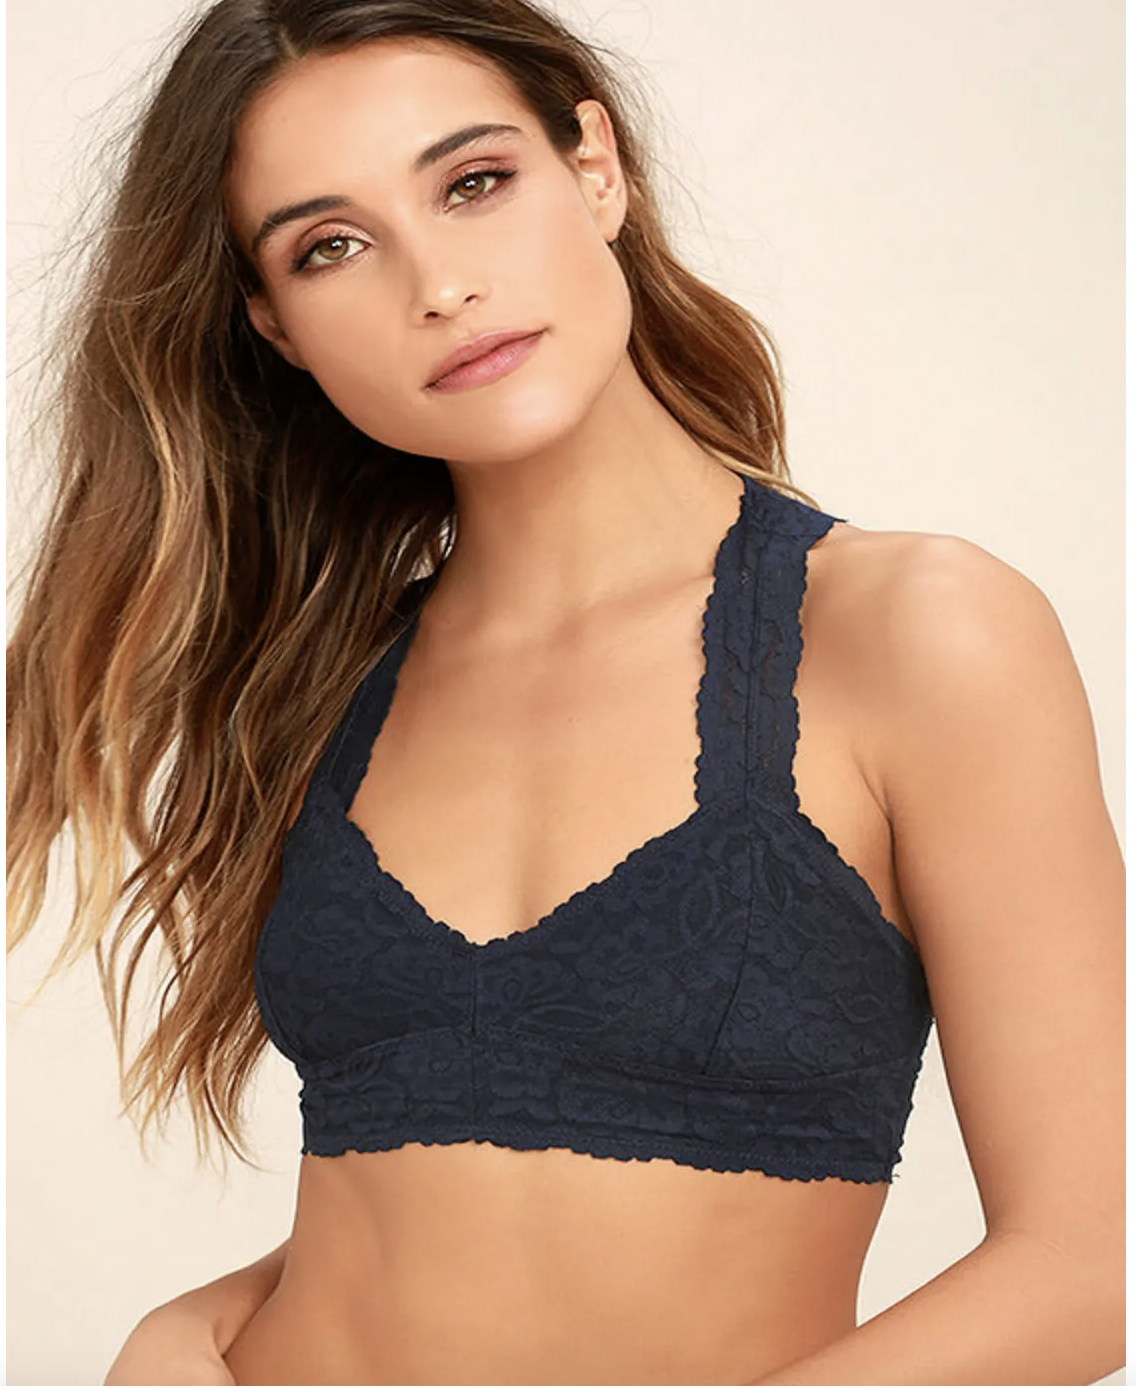 Free People Intimately Galloon Lace Racerback Bralette Lemon Water Ice  Yellow M Size M - $13 New With Tags - From Tami